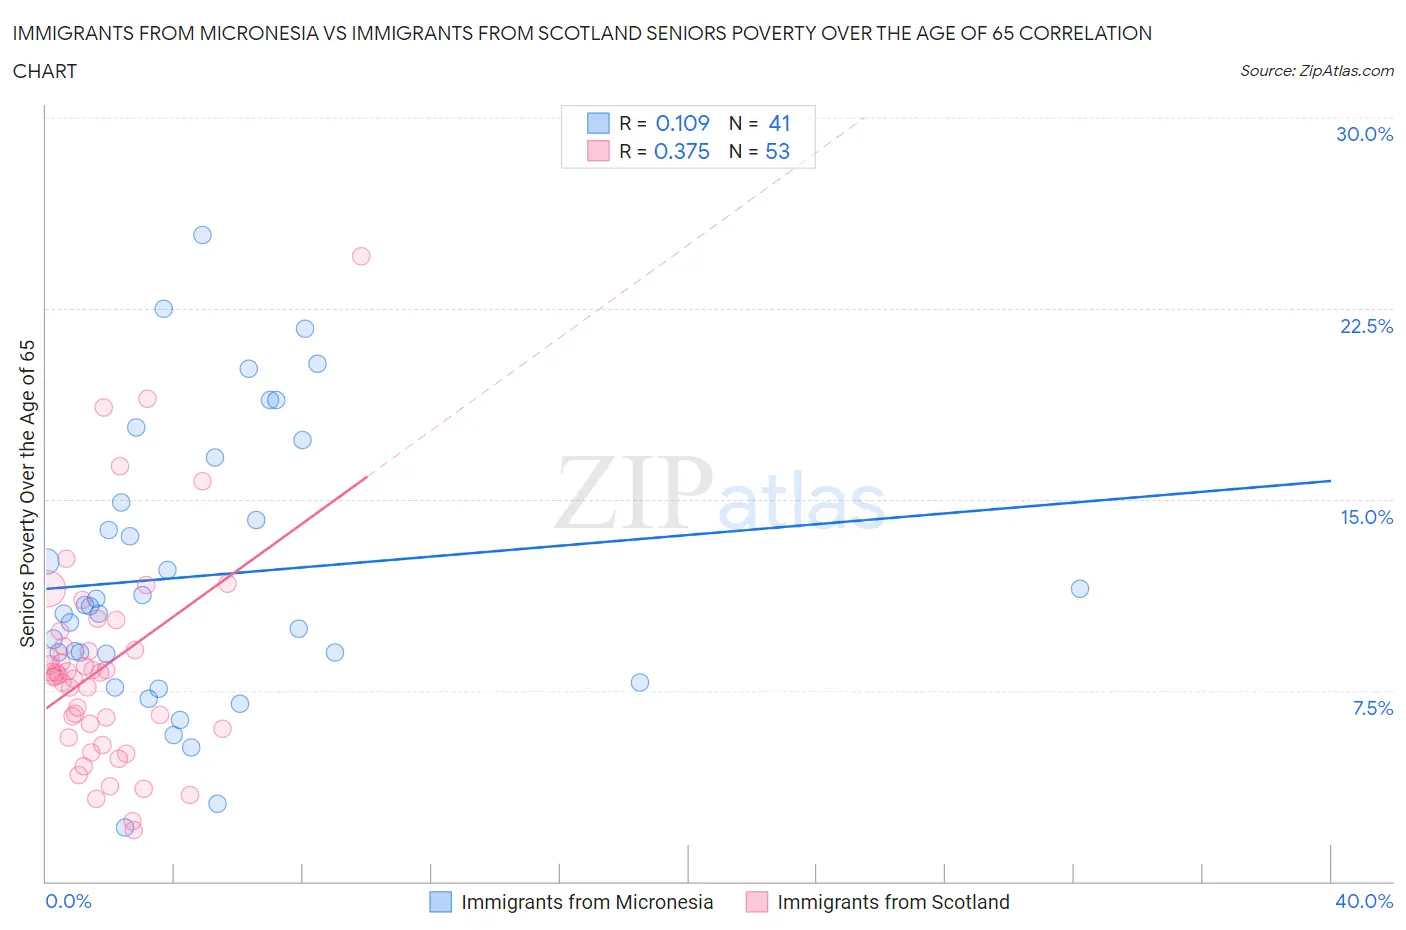 Immigrants from Micronesia vs Immigrants from Scotland Seniors Poverty Over the Age of 65